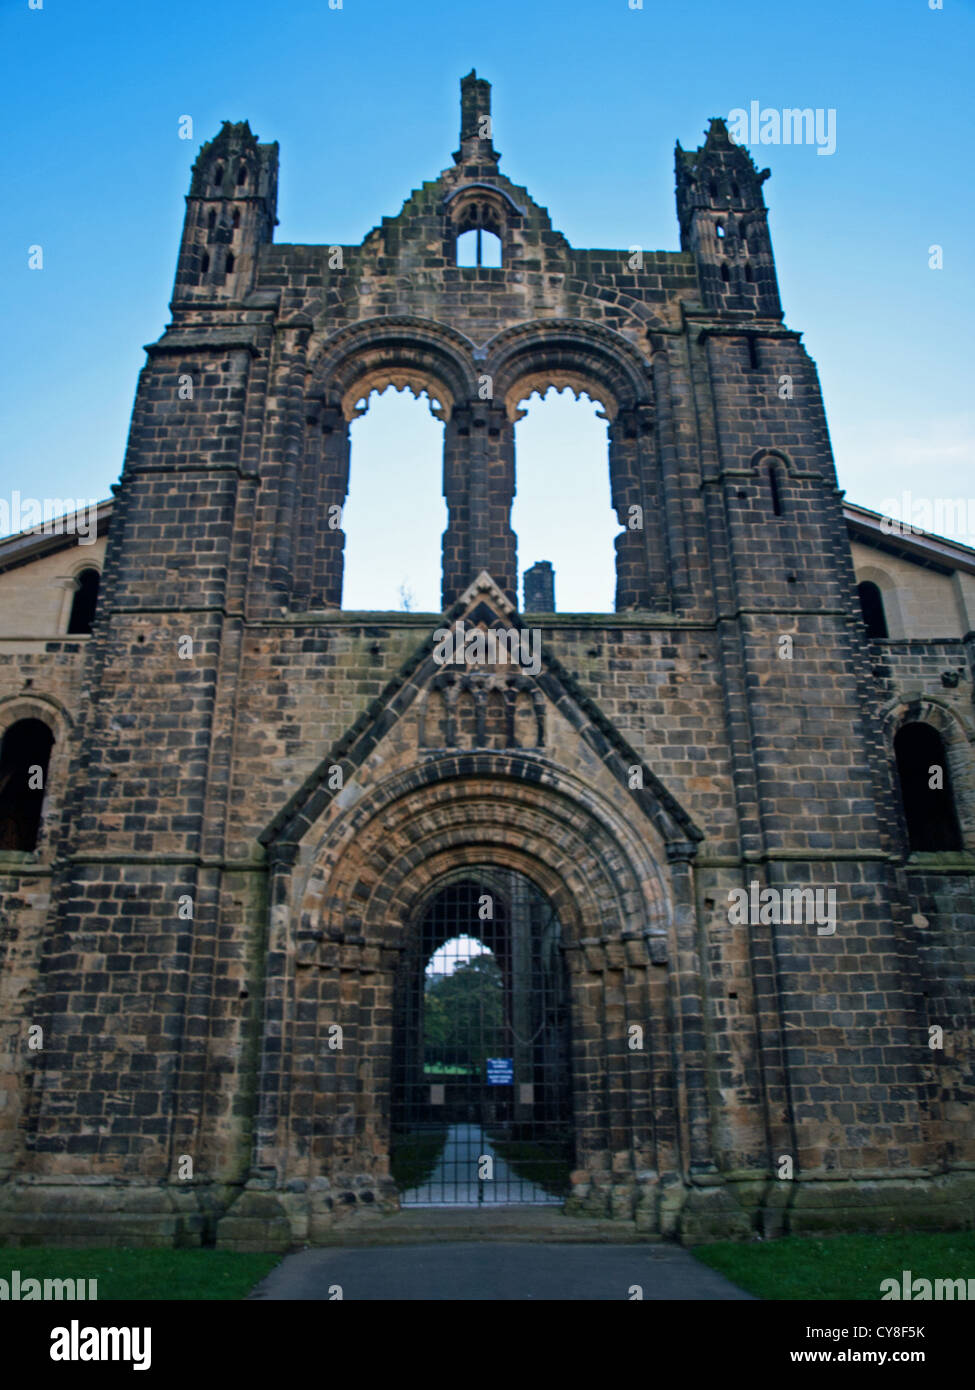 Kirkstall Abbey, a Cistercian monastery on the north bank of the River Aire founded c.1152. Stock Photo